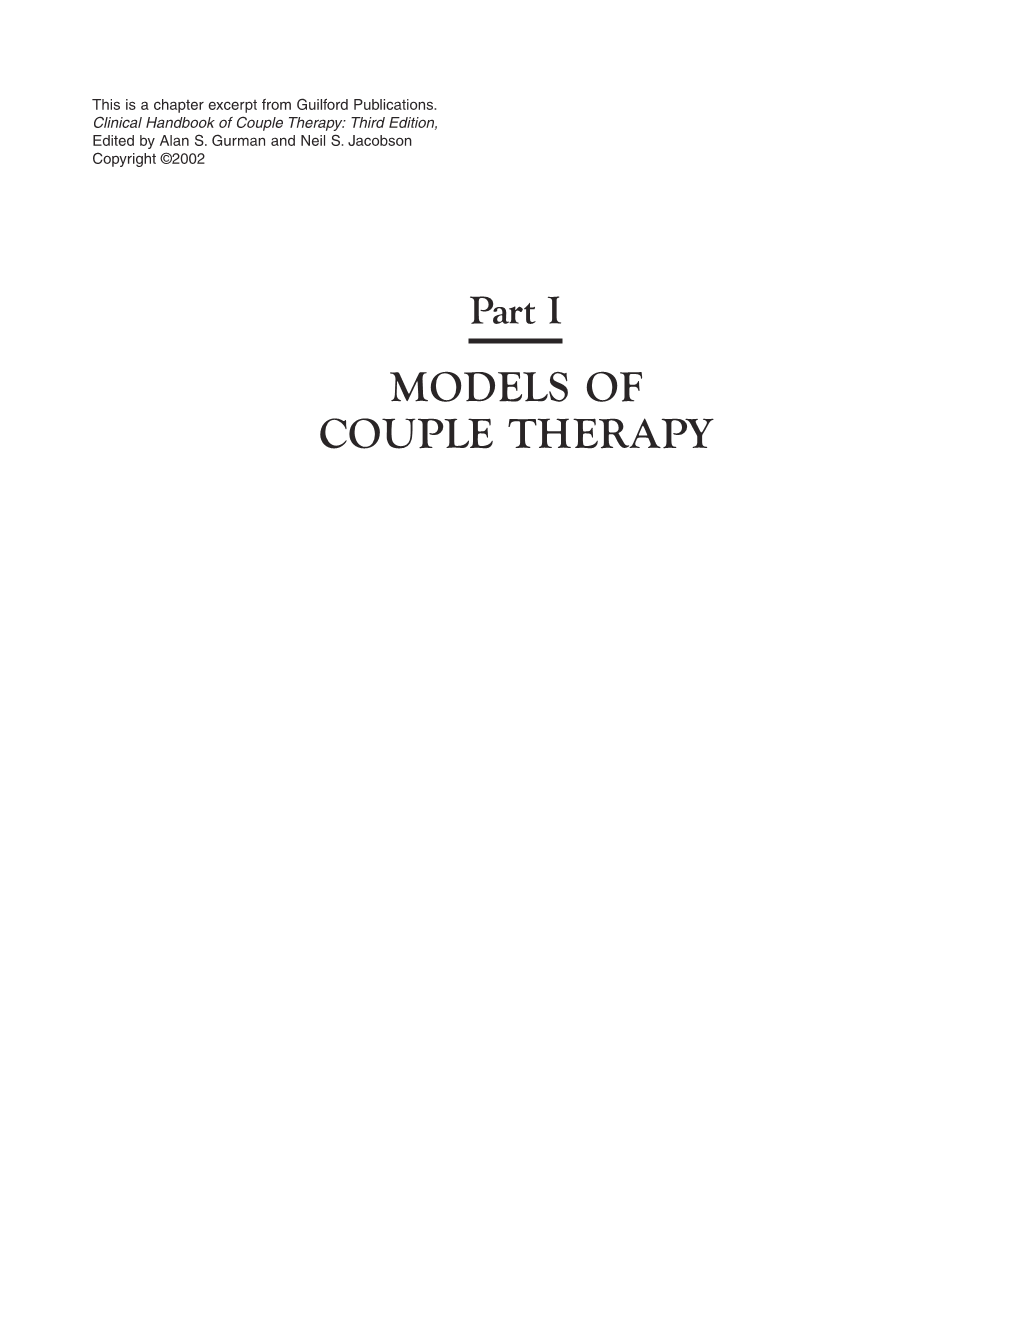 Models of Couple Therapy